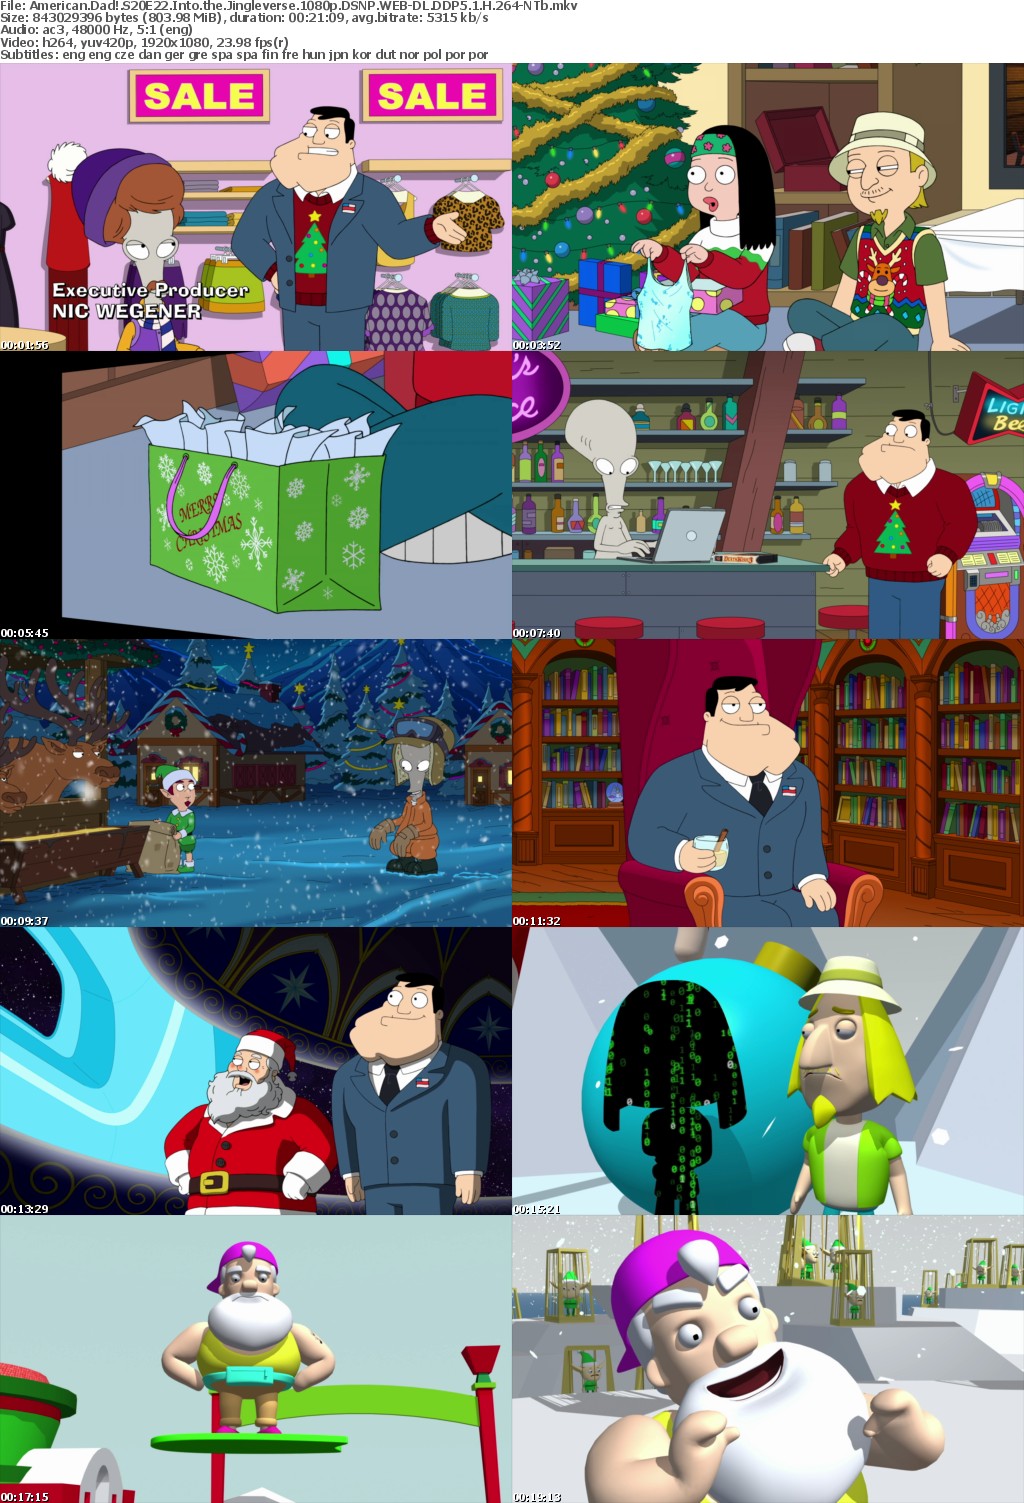 American Dad! S20E22 Into the Jingleverse 1080p DSNP WEB-DL DDP5 1 H 264-NTb